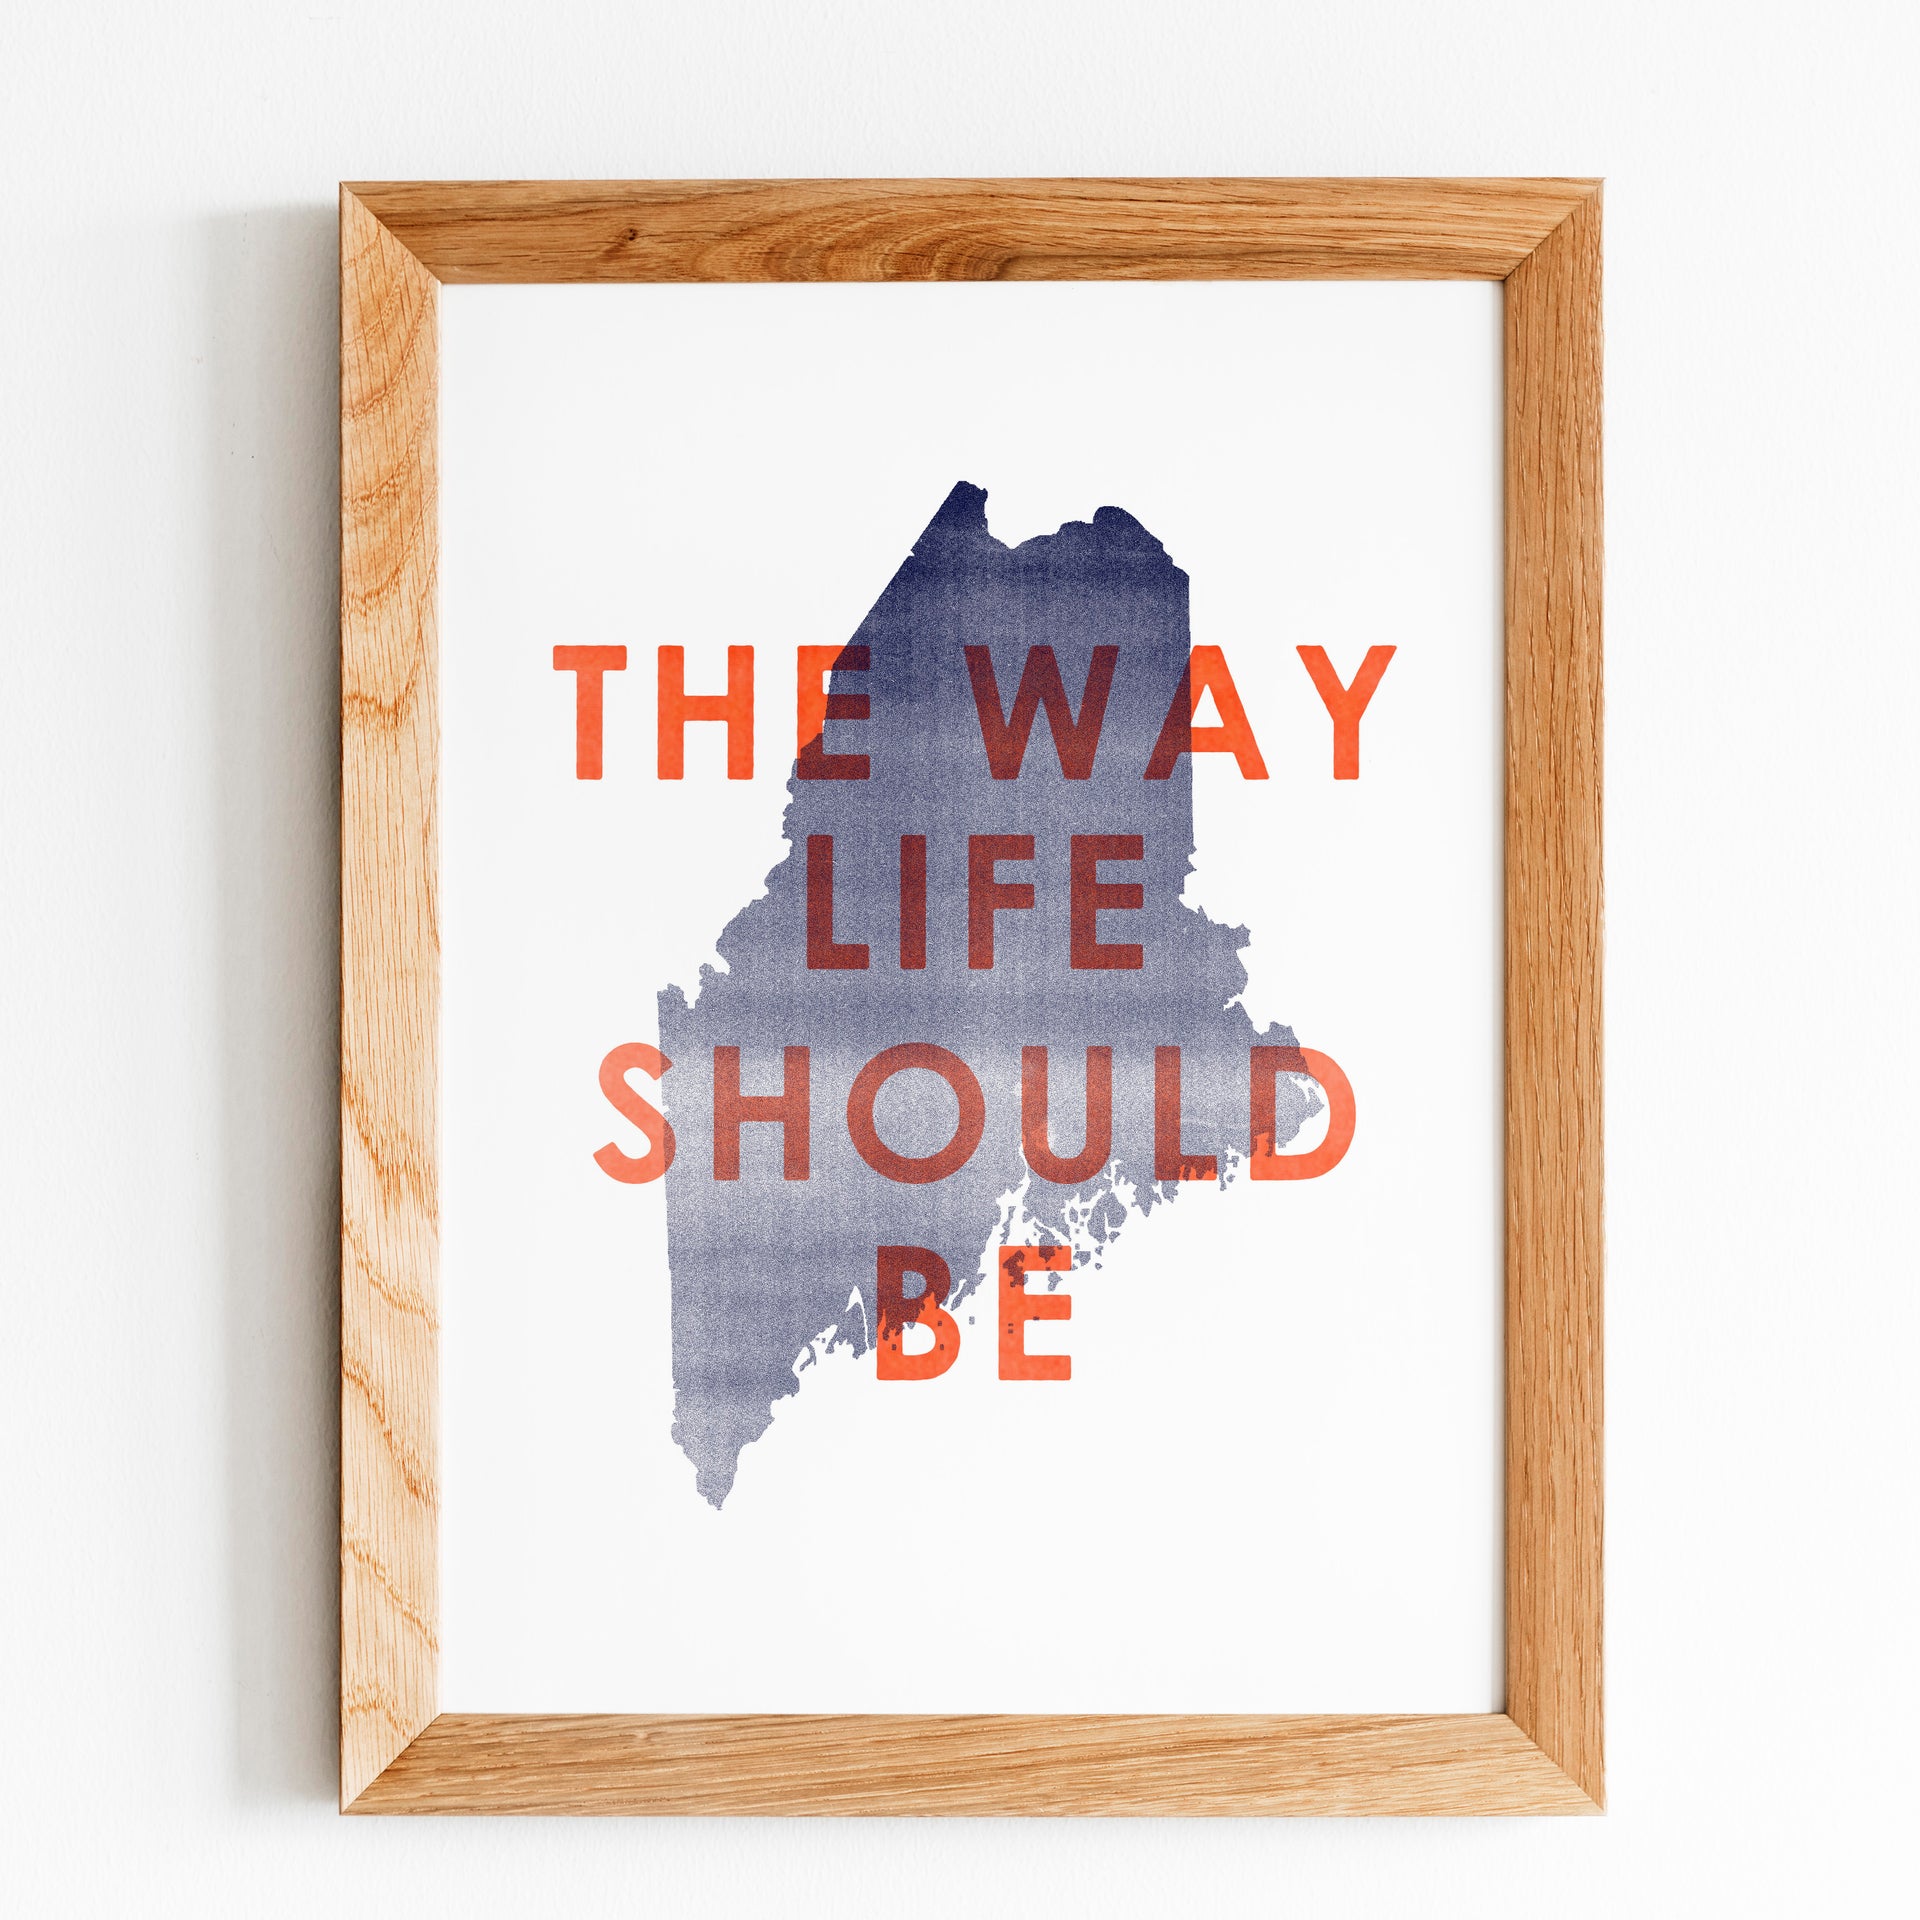 The Way Life Should Be Maine Print by Gert & Co